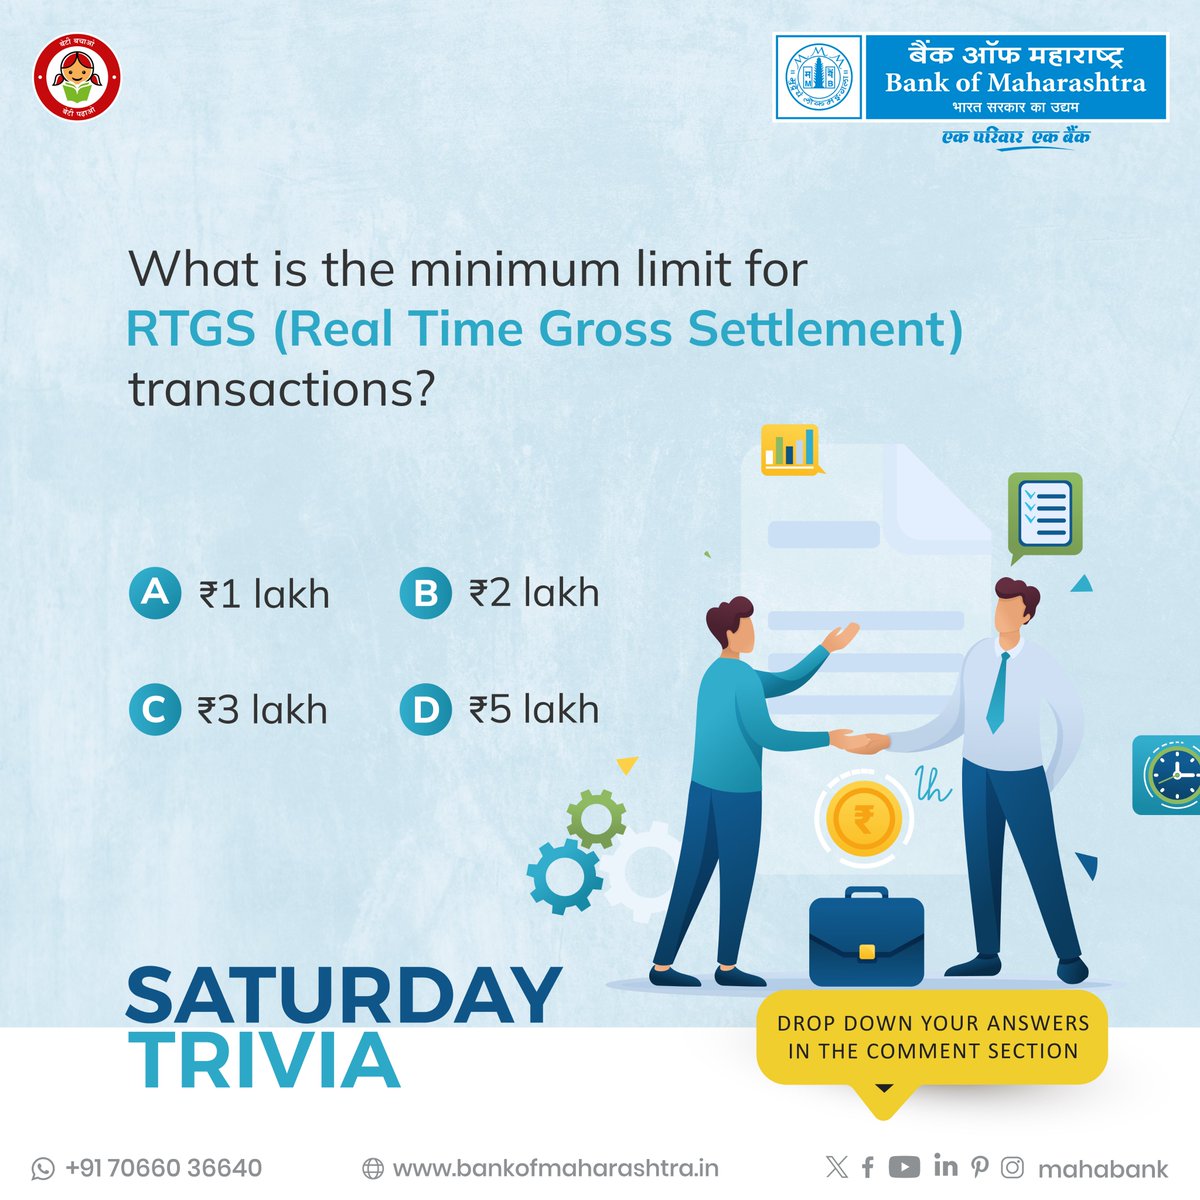 Ready for a banking brain-teaser? What is the minimum limit for RTGS transactions? Share your answers and let's unravel this together!

#BankofMaharashtra #Mahabank #SaturdayTrivia #TriviaChallenge